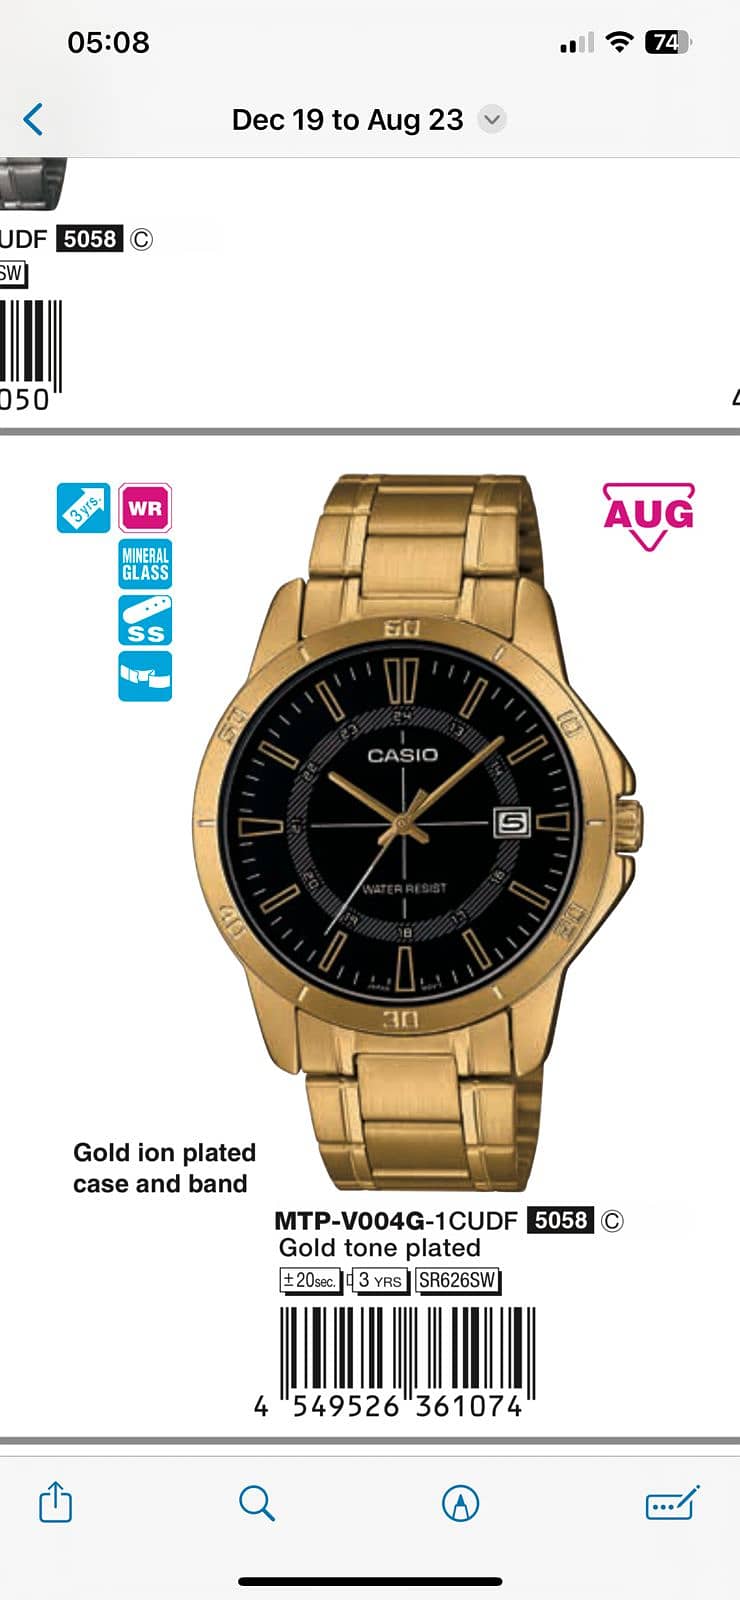 Casio watches on discounted prices 10